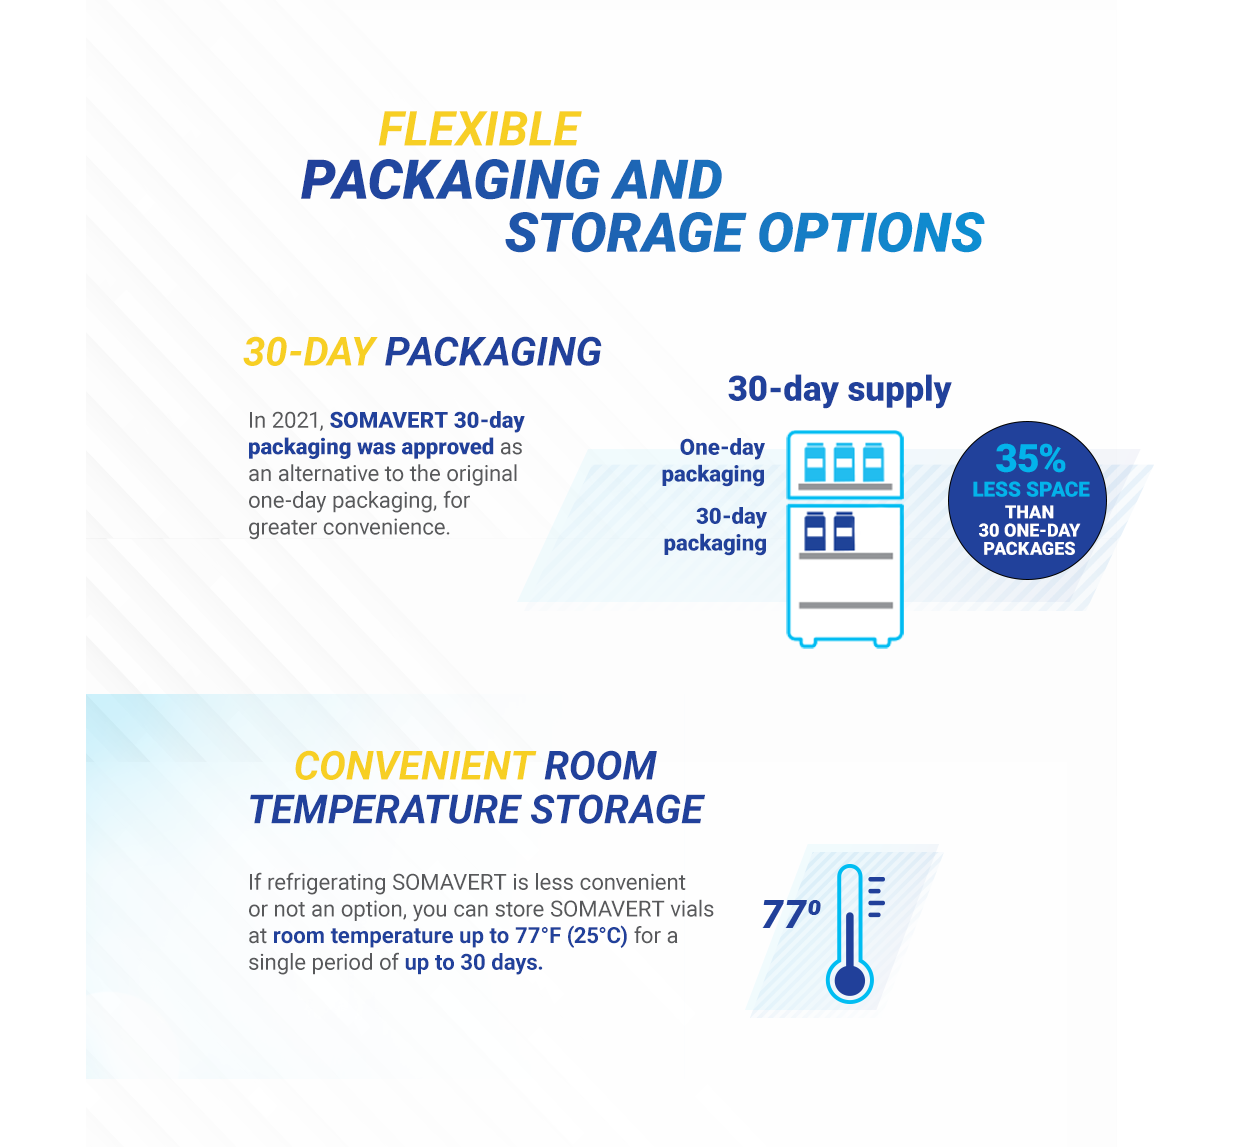 Flexible packaging and storage options banner